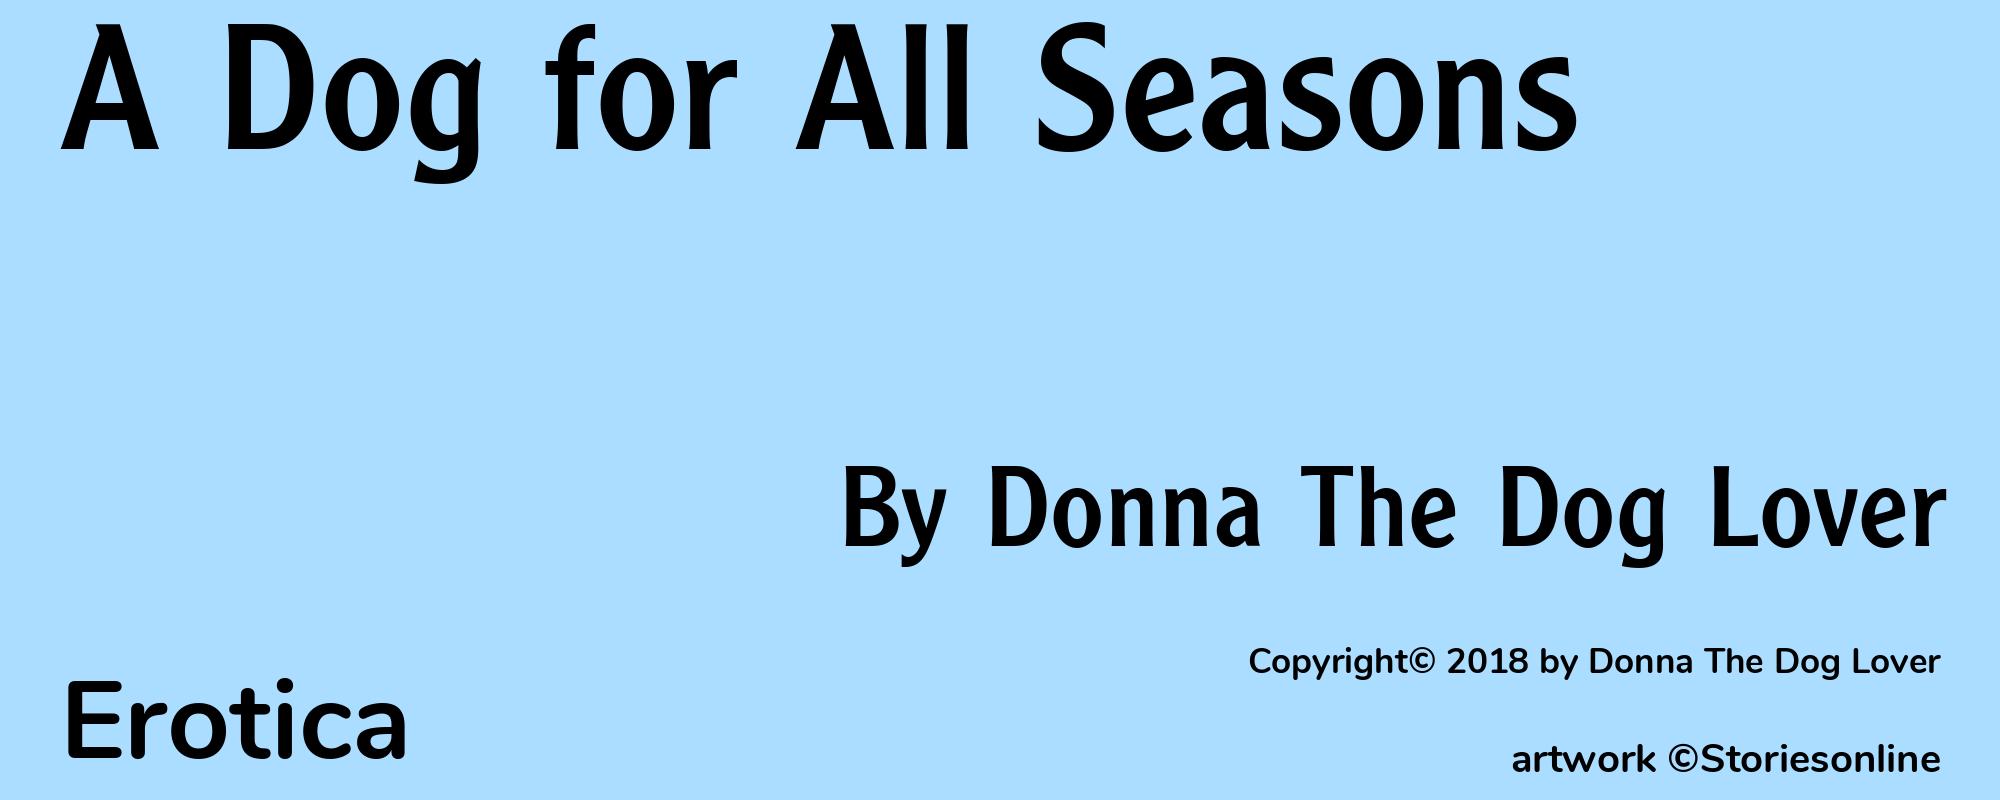 A Dog for All Seasons - Cover